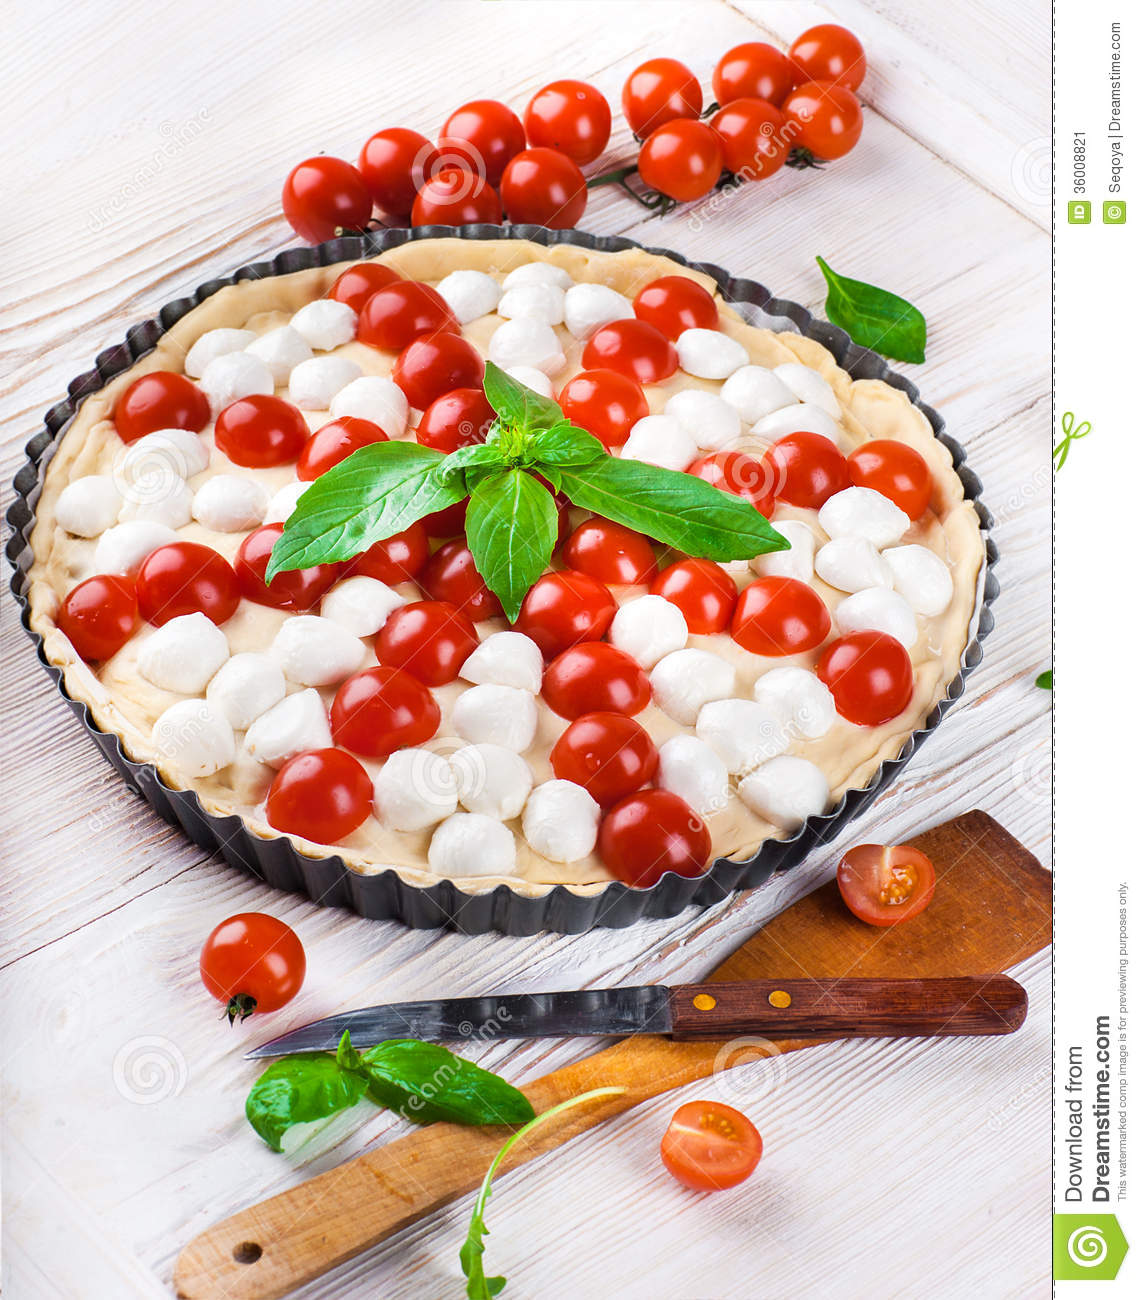 Italian Food Clipart Images   Crazy Gallery